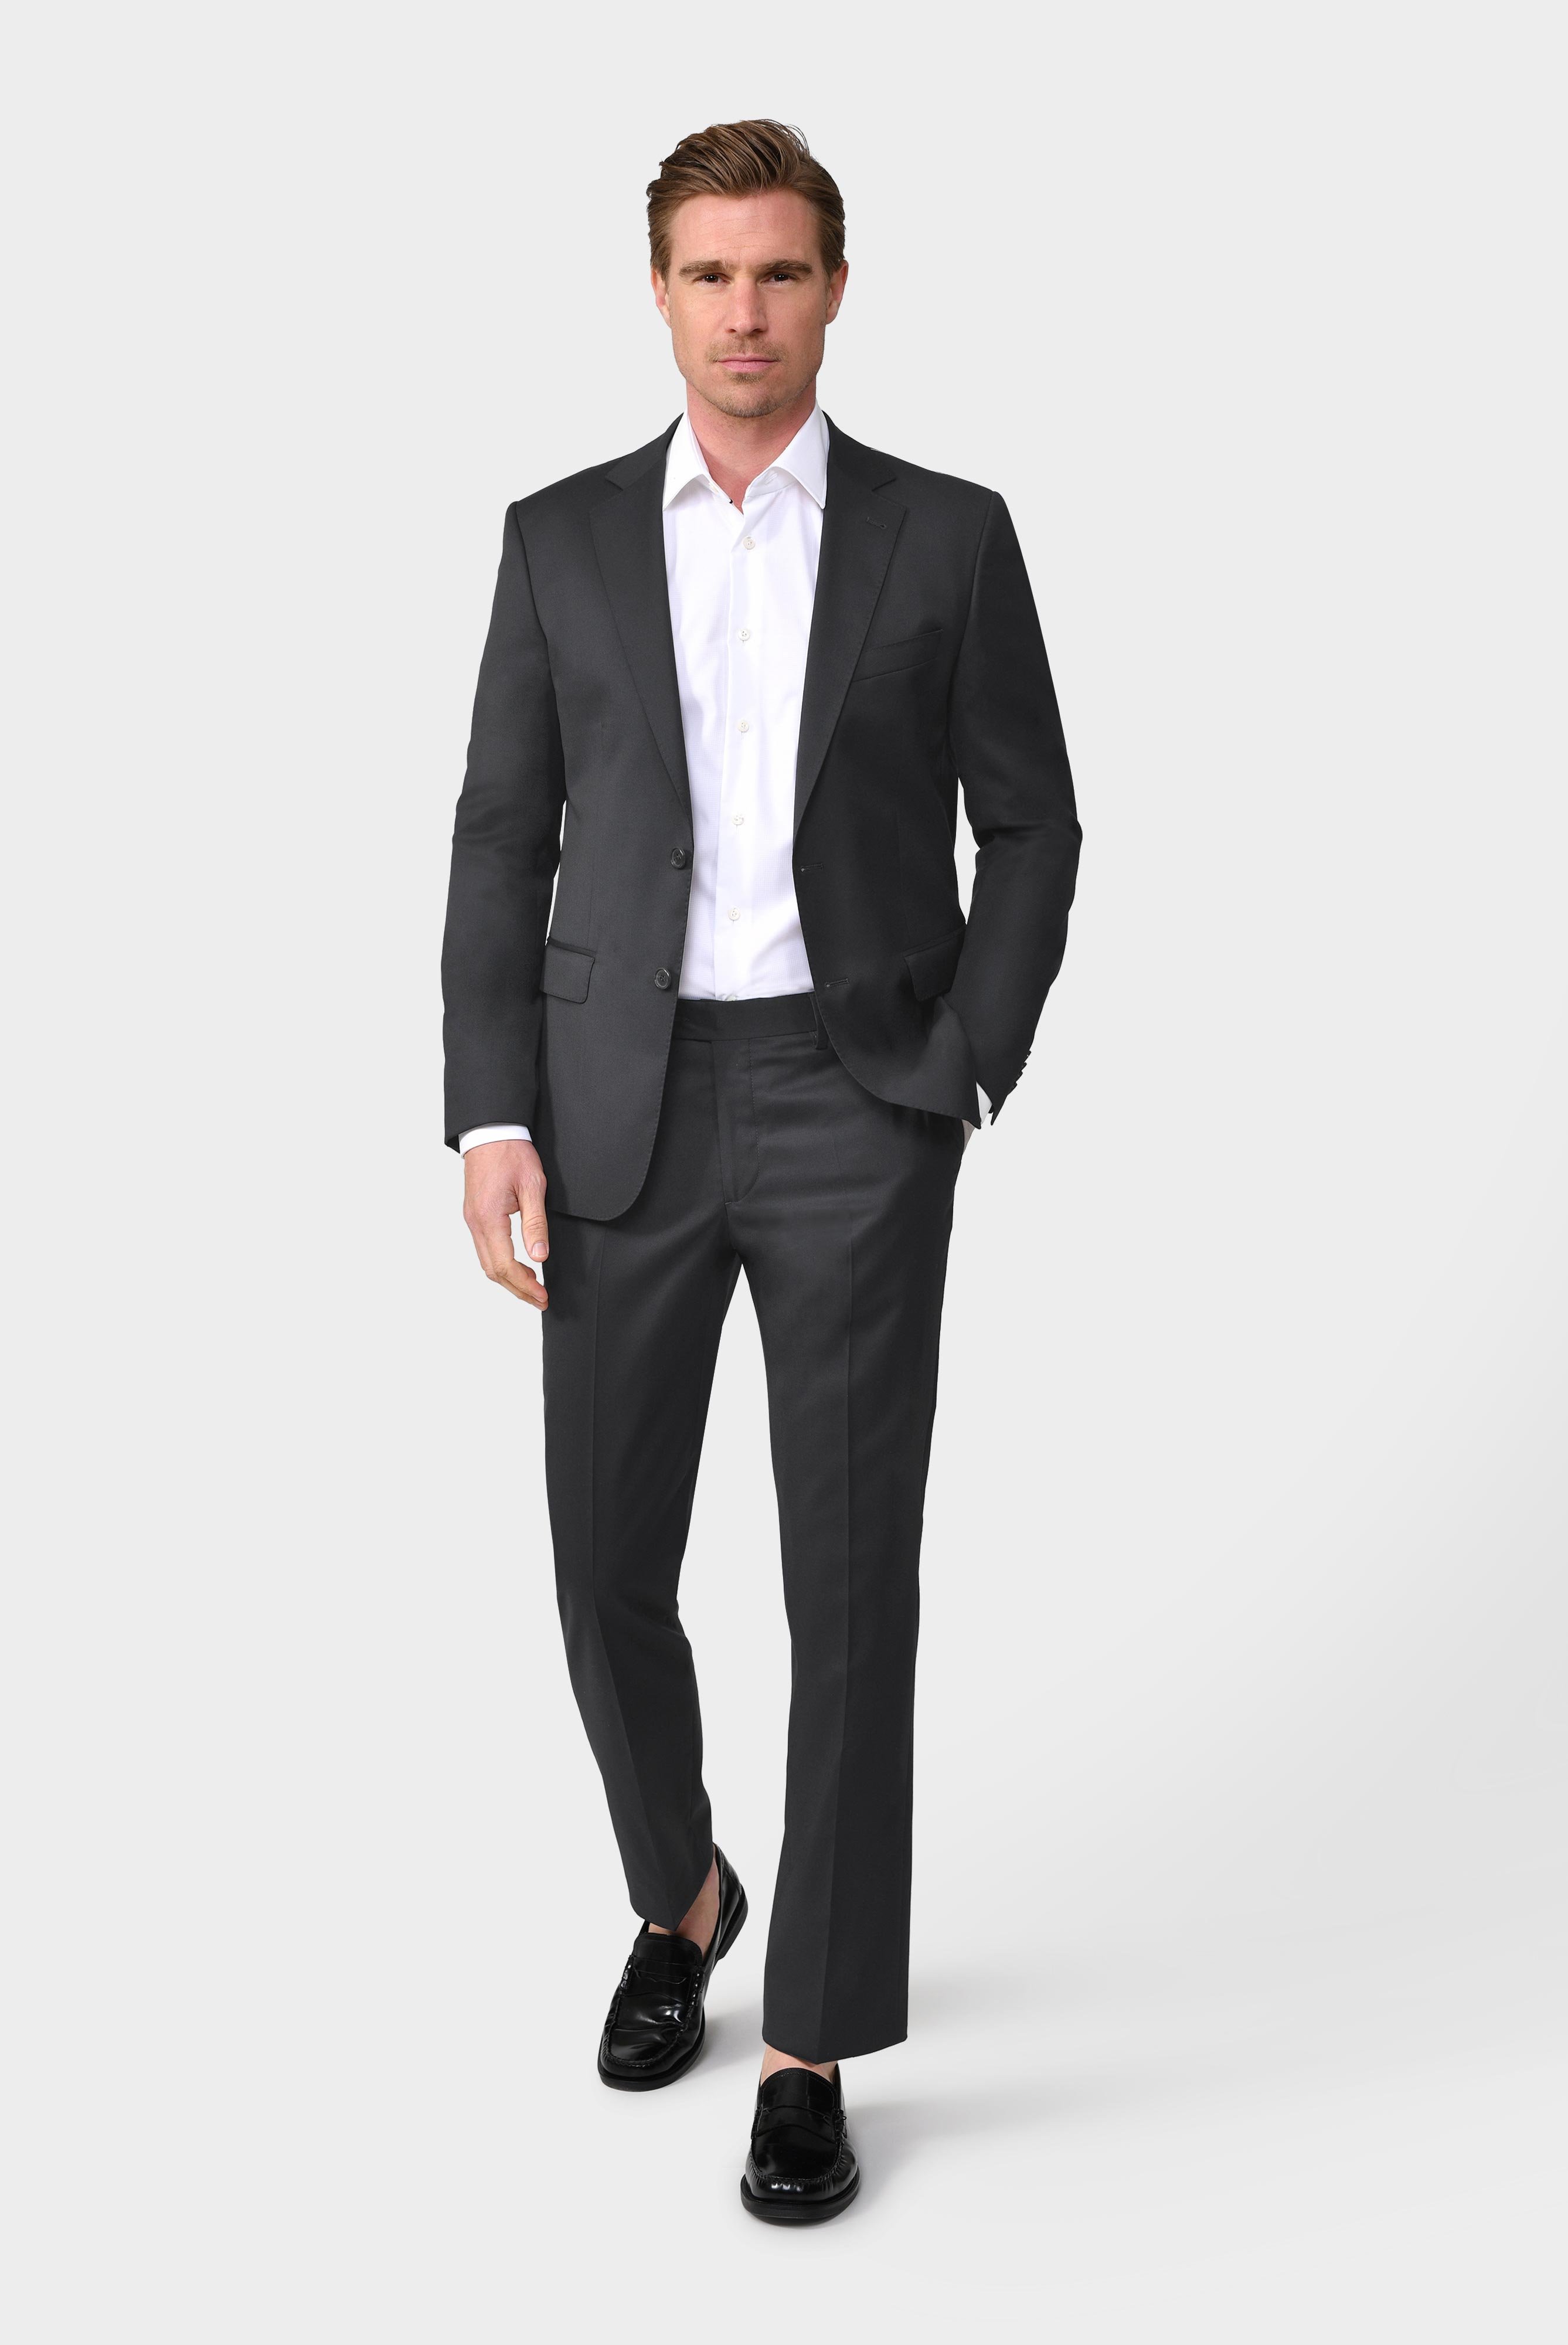 Jeans & Trousers+Men''s pants made of merino wool+80.7804.16.H01000.090.48